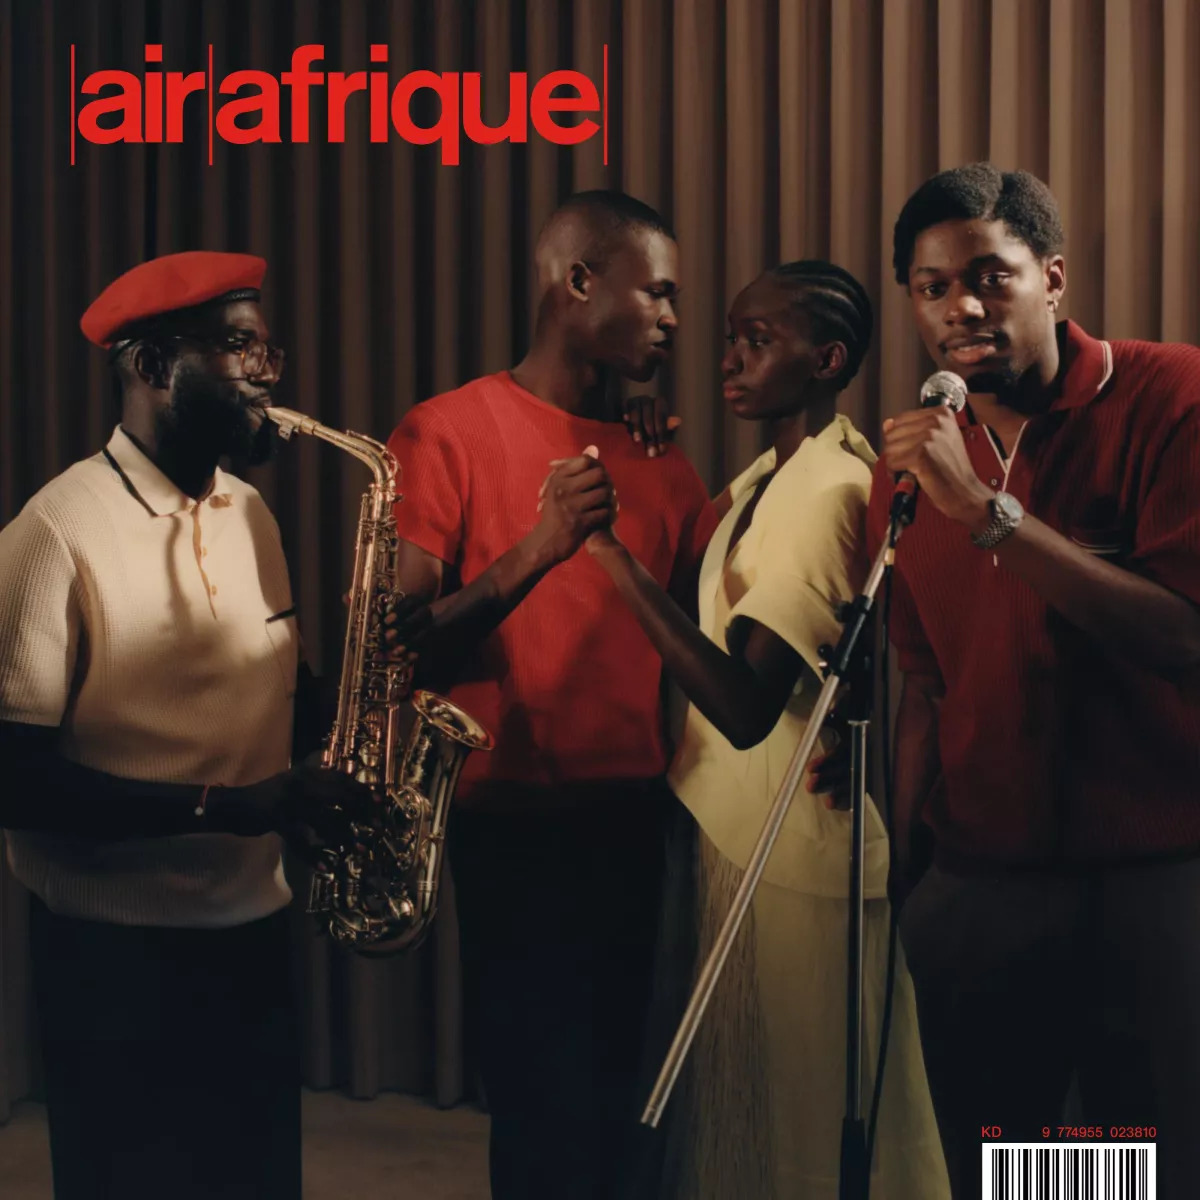 What Happened to Air Afrique, the Pan-African Airline from the 60’s?